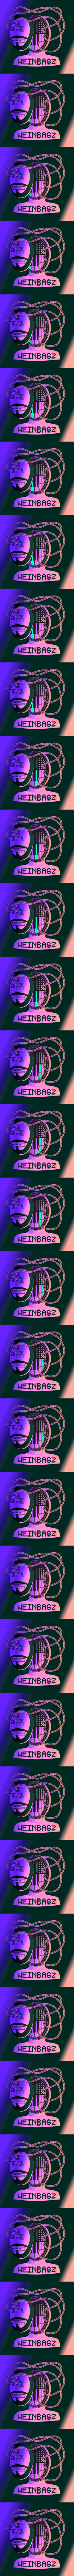 Weinbagz Presents collection image